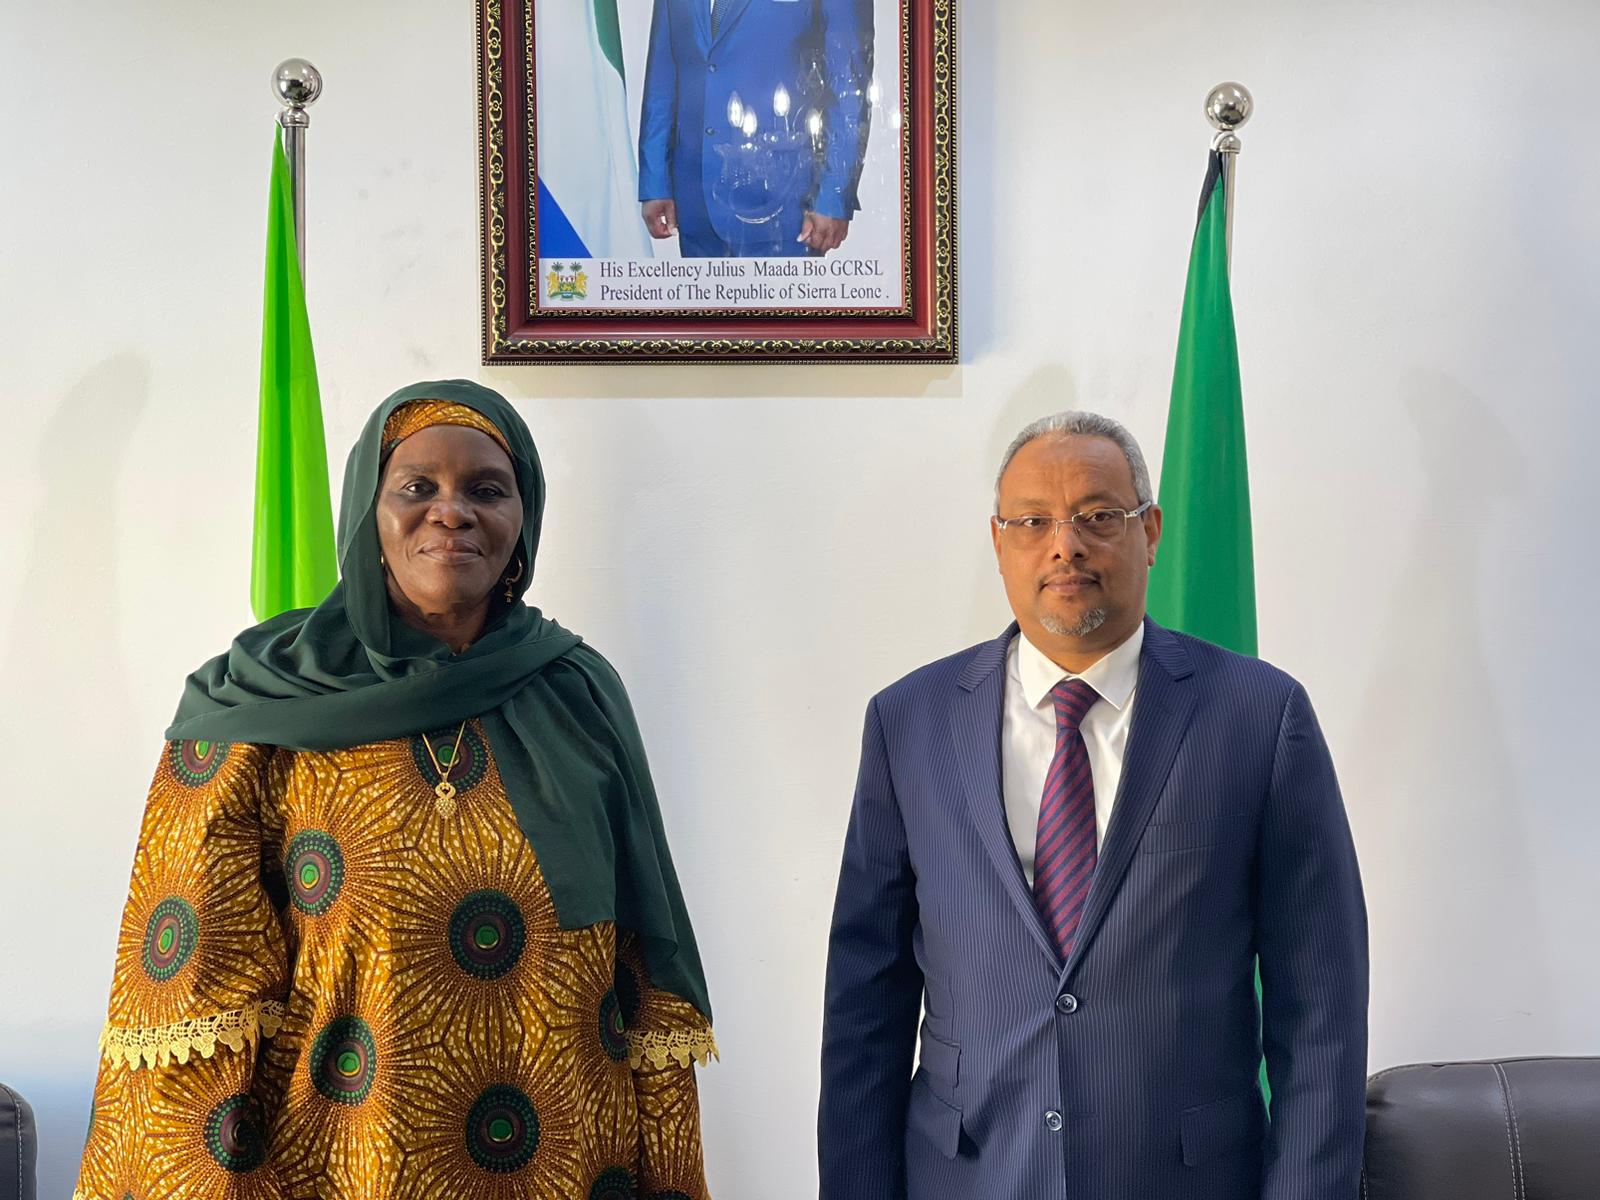 Visit of His Excellency to the Embassy of the Republic of Sierra Leone